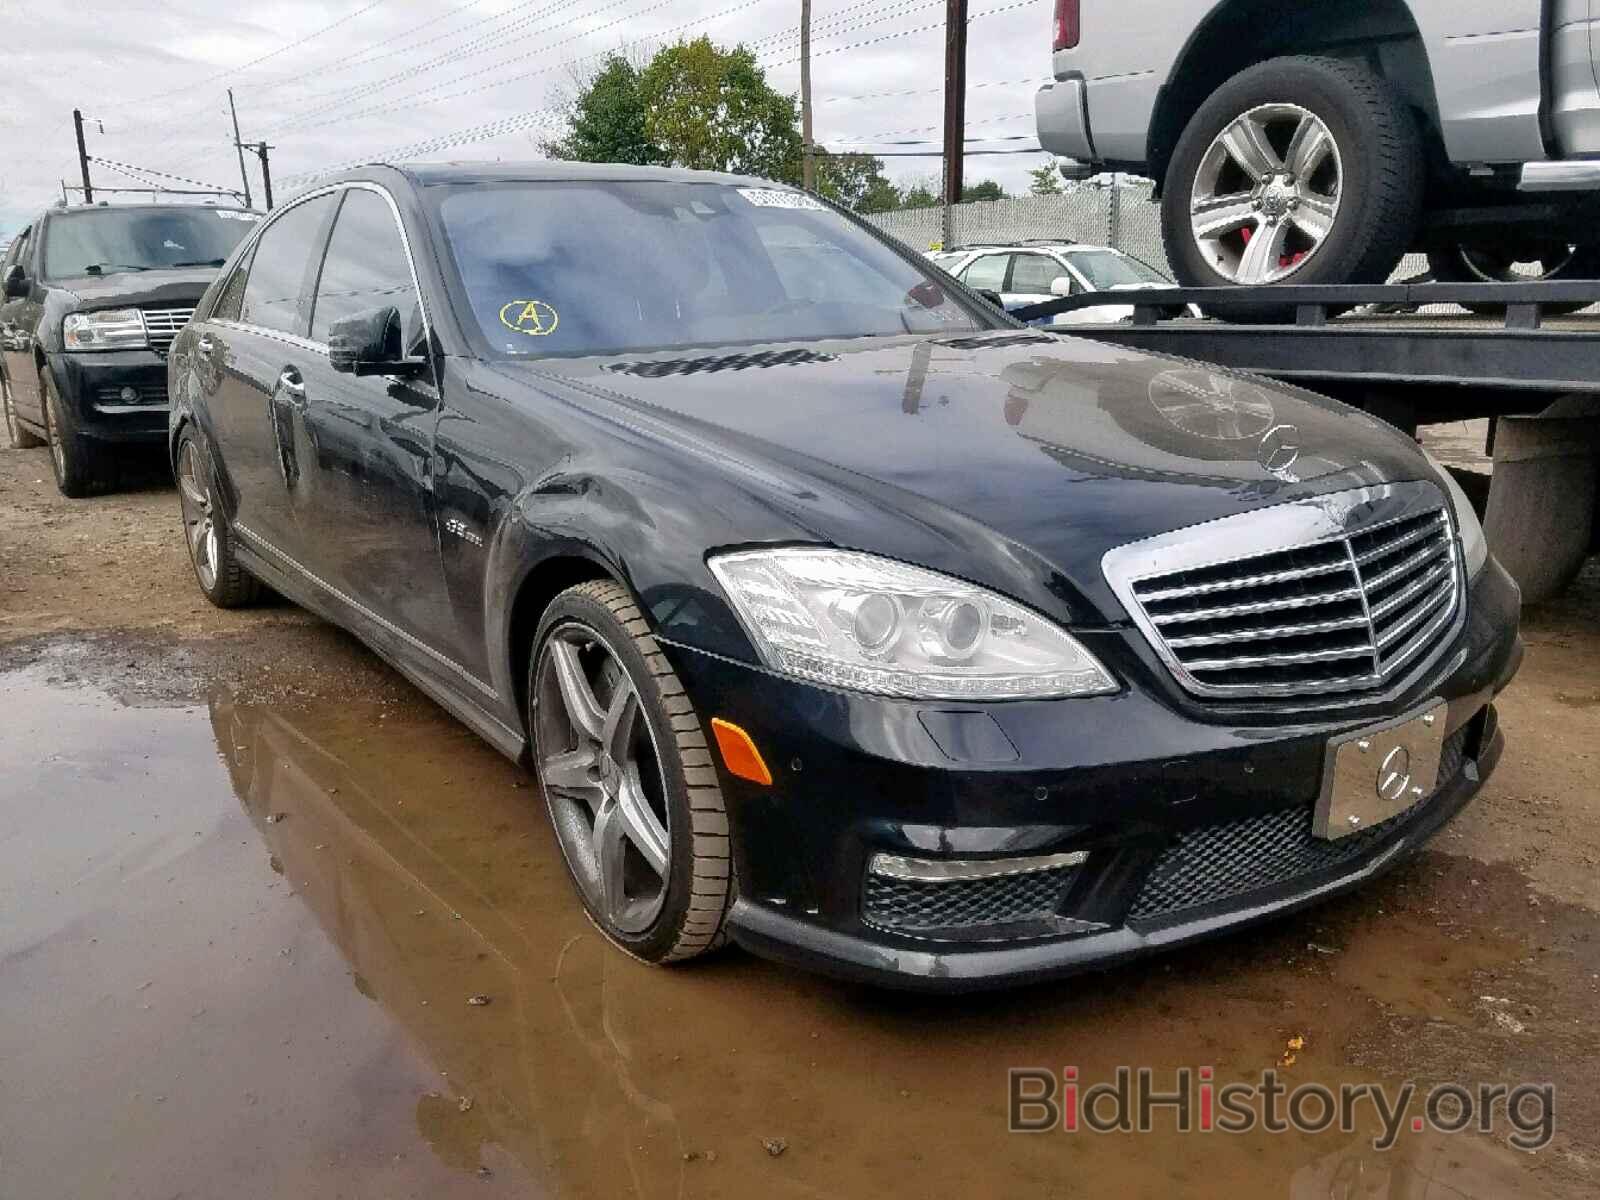 Photo WDDNG7HB6AA341520 - MERCEDES-BENZ AMG 2010